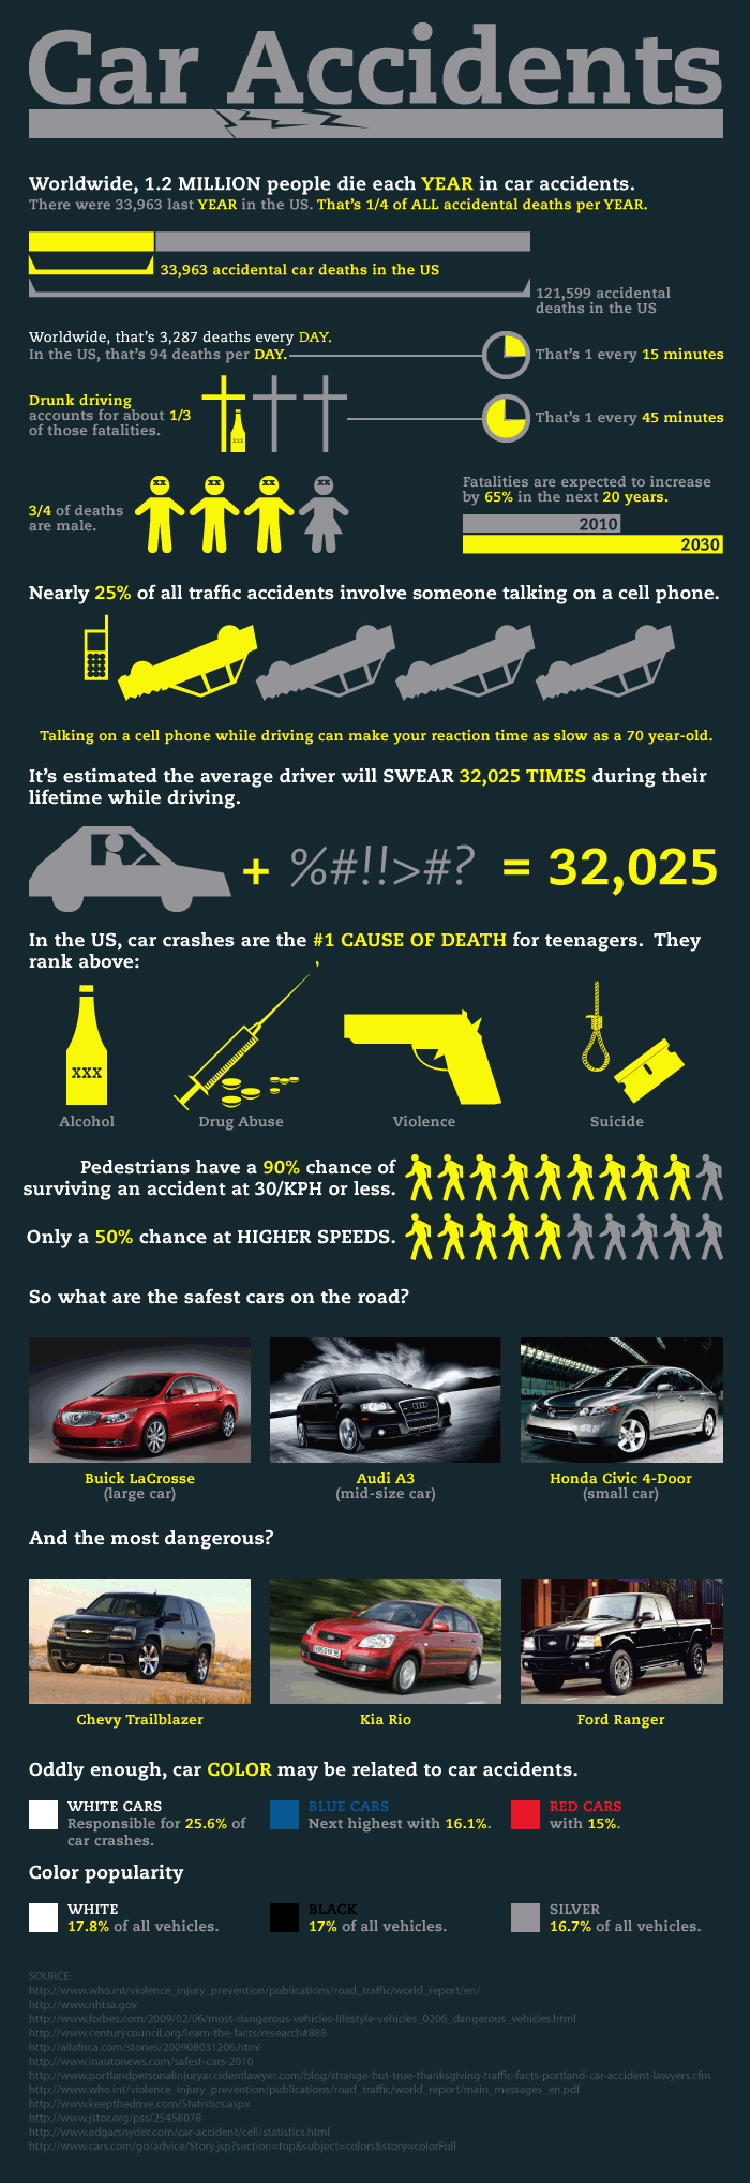 A Few Facts About Car Accidents